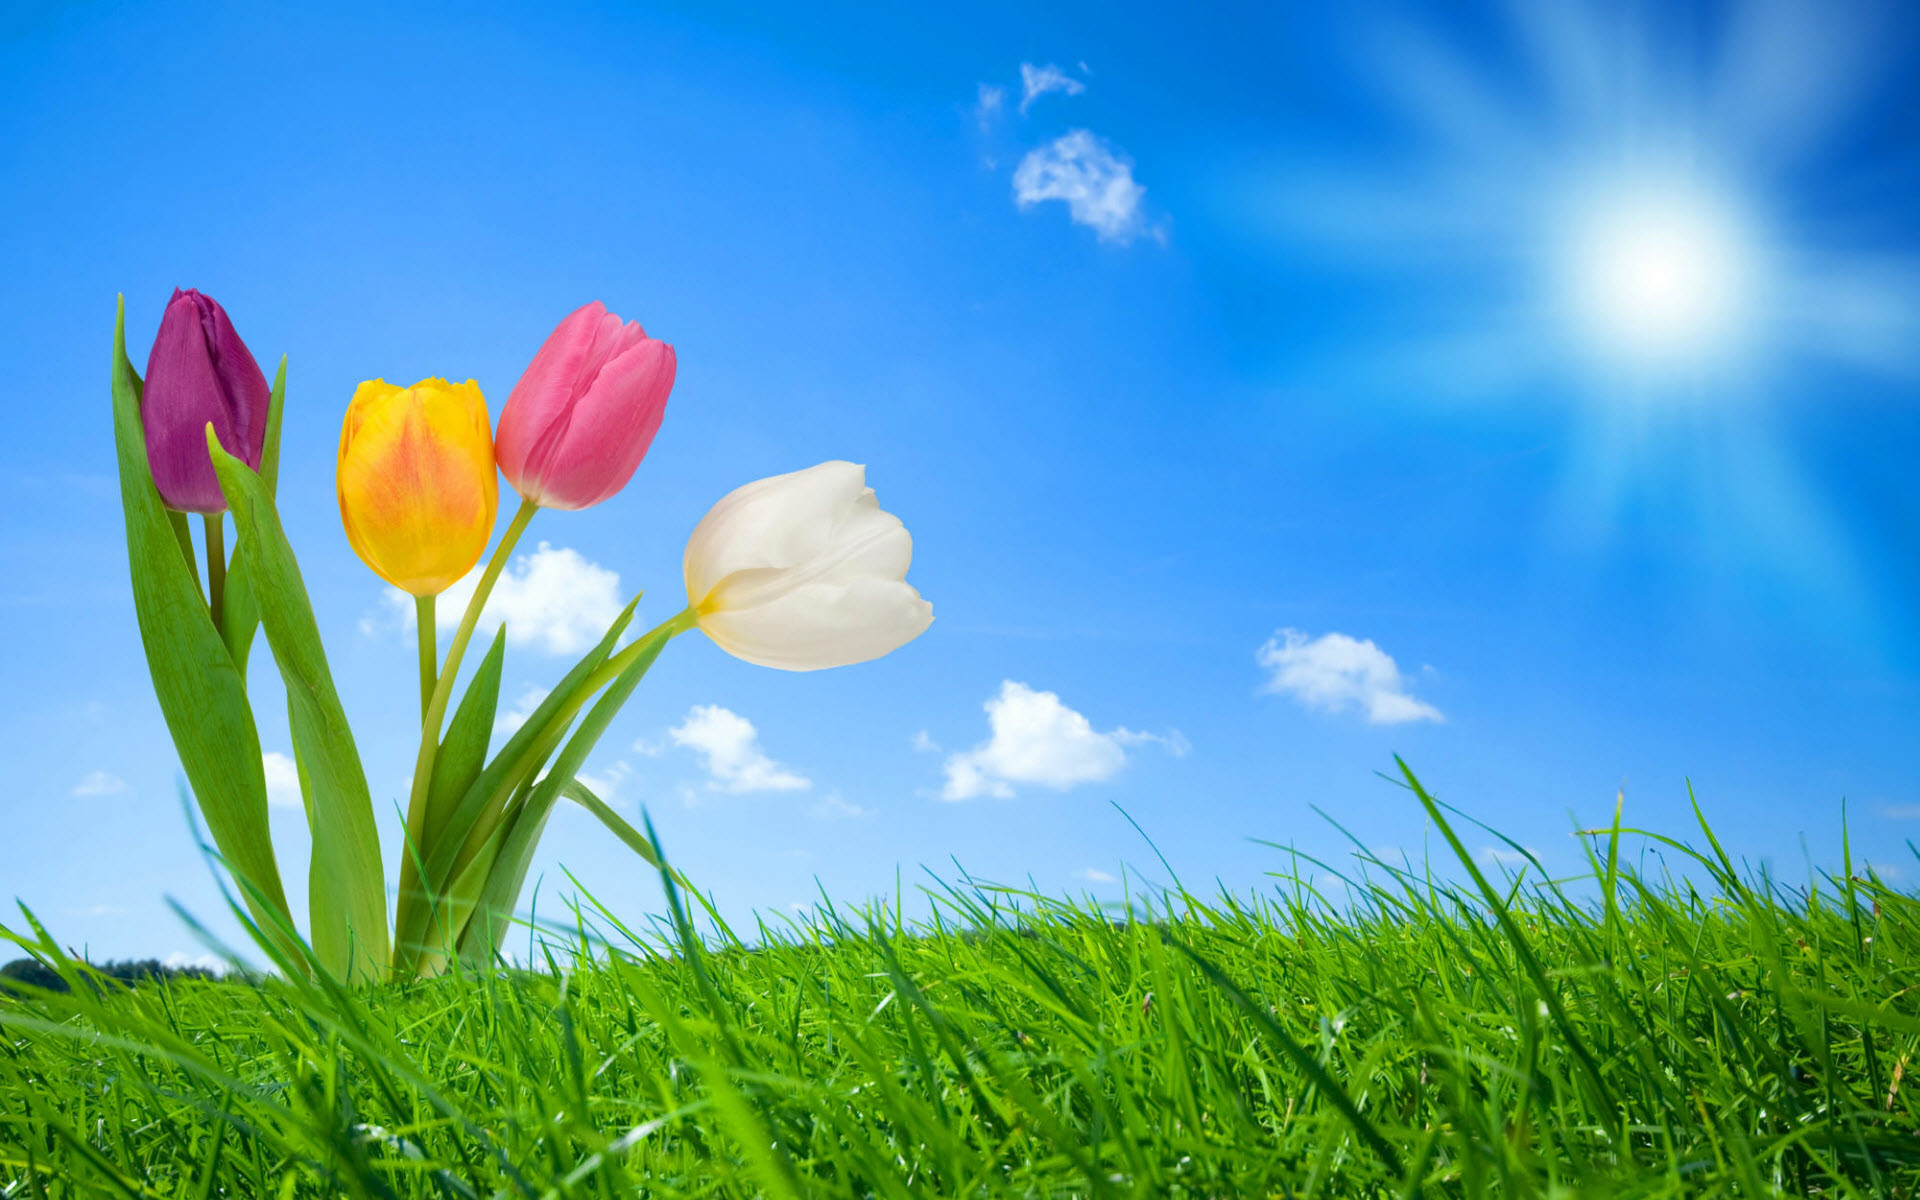 1920x1200 Free Spring Wallpaper Backgrounds | 2012 Nature Wallpapers. All images are  copyrighted by their .